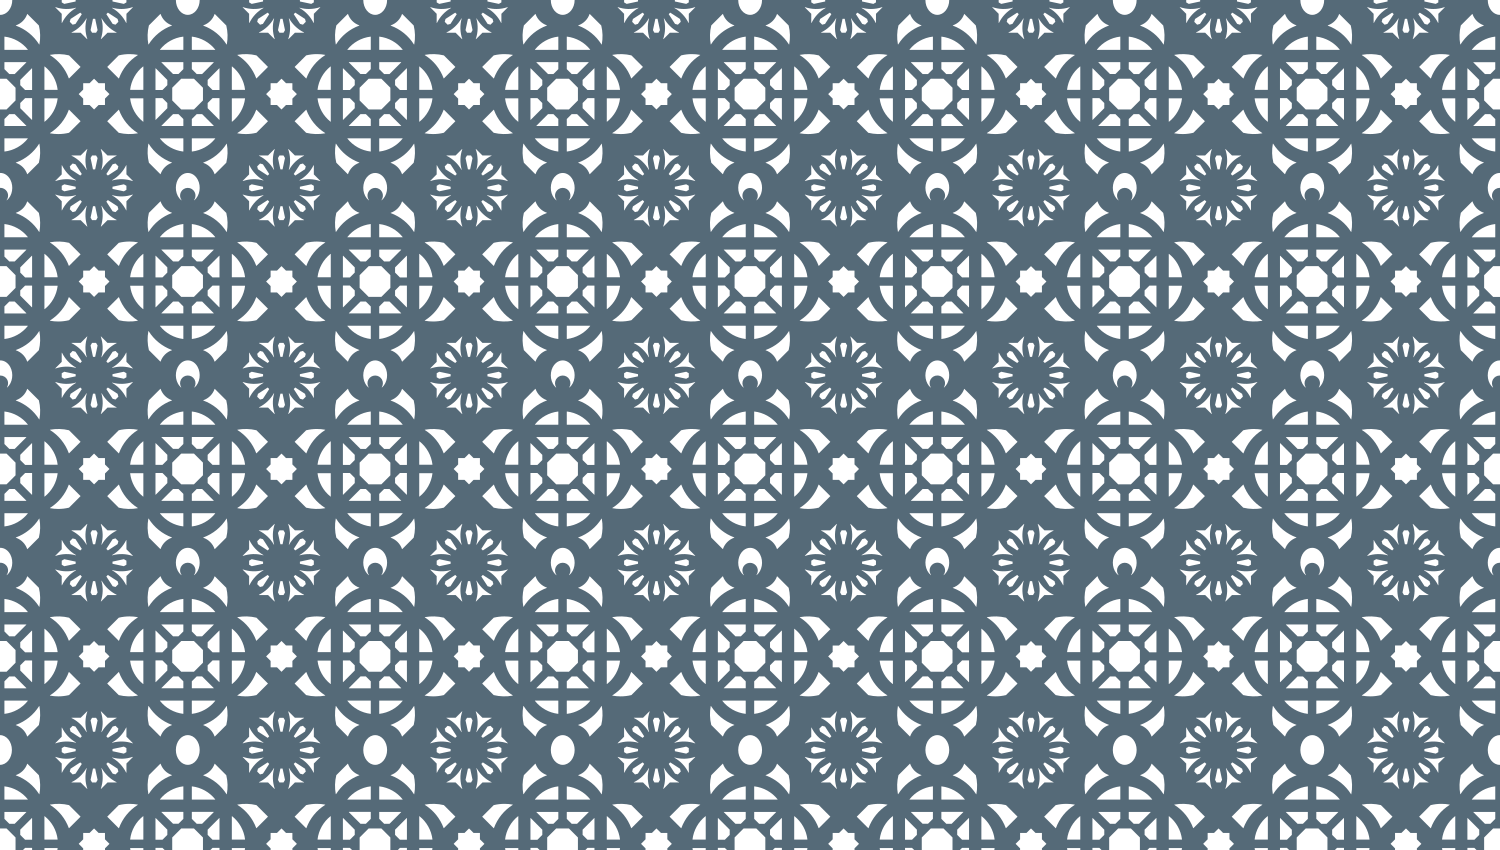 Parasoleil™ Casablanca© pattern displayed with a blue color overlay